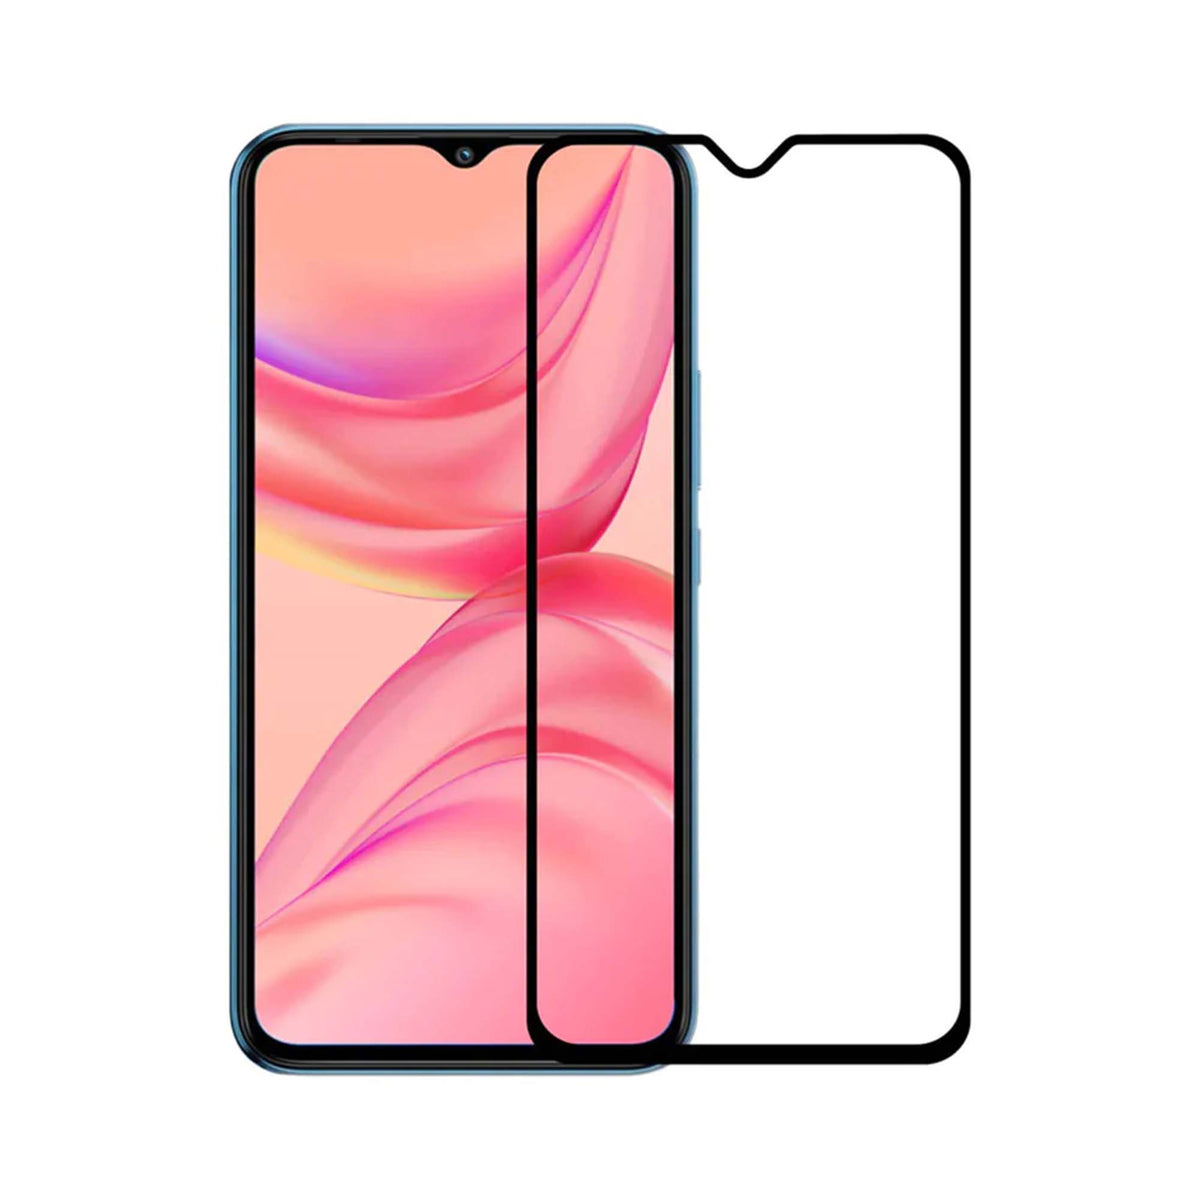 TEMPERED GLASS FOR OPPO F9 / F9 PRO